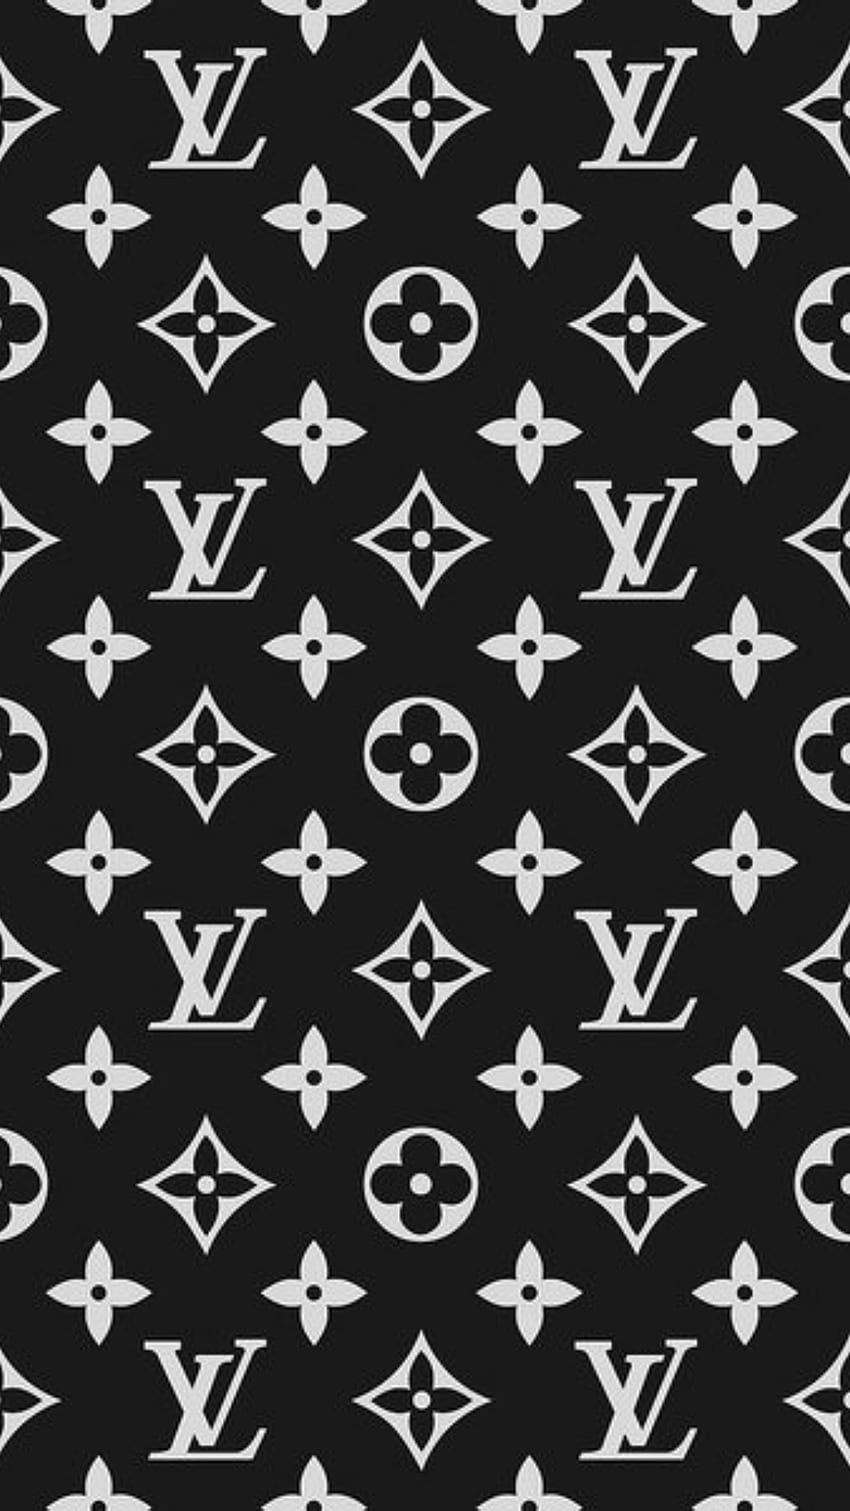 LOUIS VUITTON WATCH PRIZE FOR INDEPENDENT CREATIVES  LOUIS VUITTON